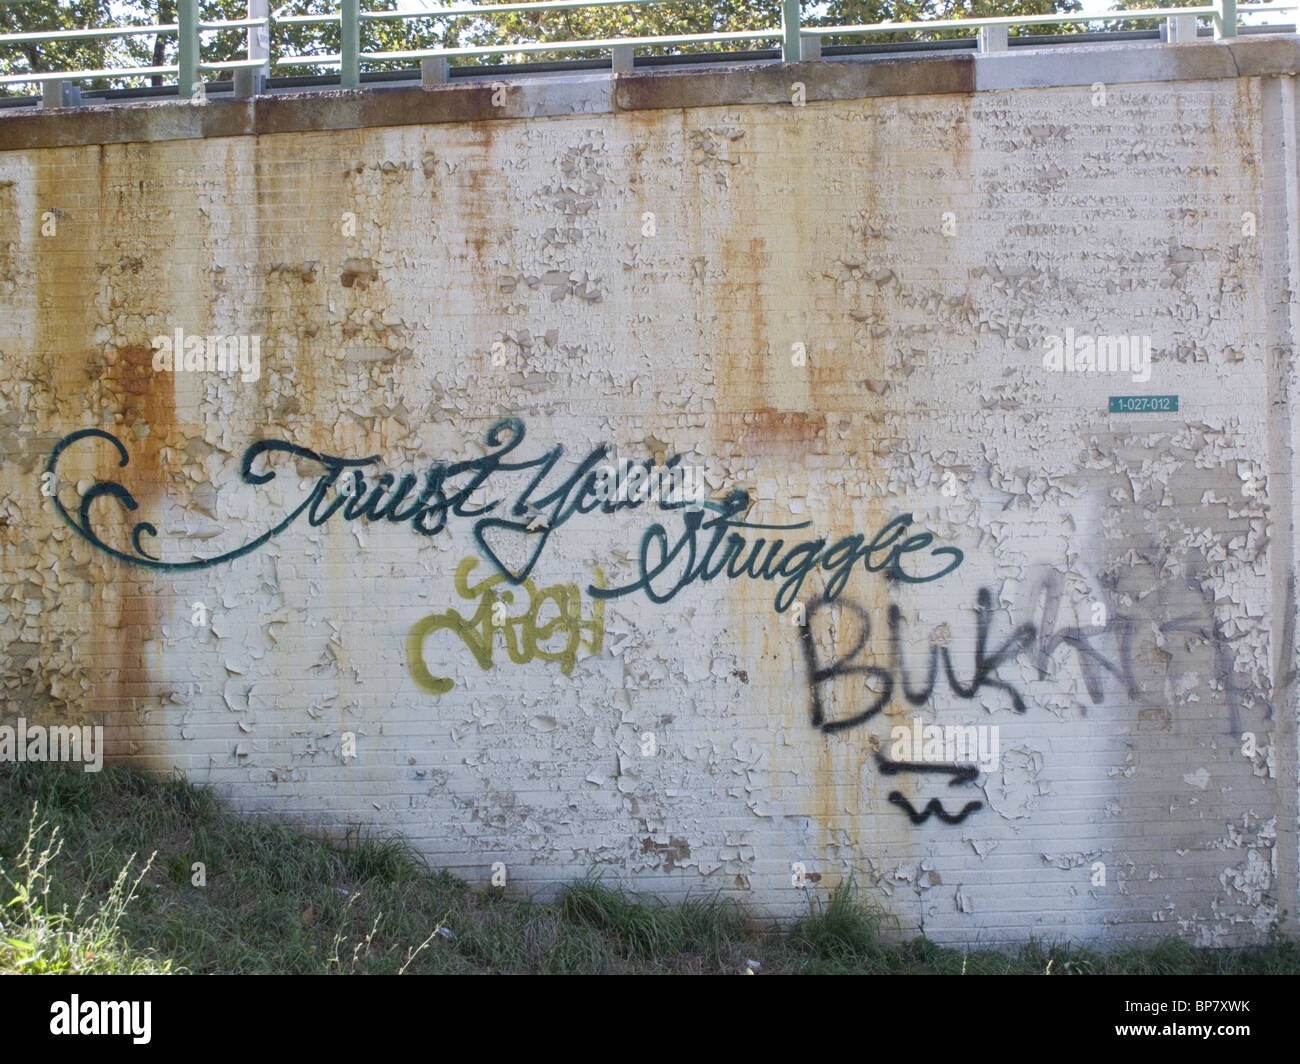 'Trust in your struggle' written on a retaining wall near a subway entrance in Brooklyn, NY Stock Photo